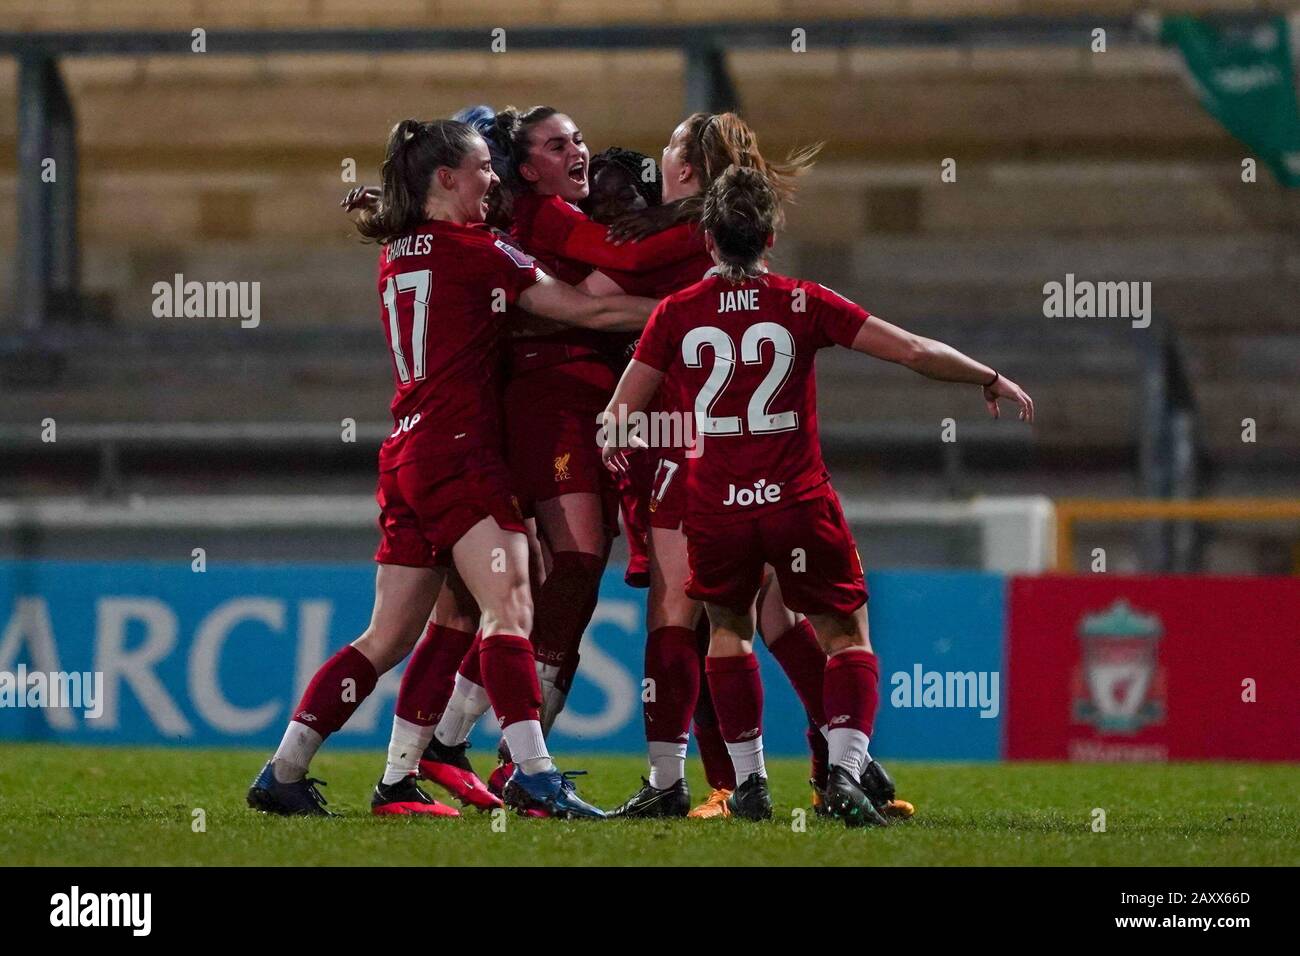 CHESTER. ENGLAND. FEB 13th: Players of Liverpool FC Women celebrate Rinsola Babajide's goal during the Women’s Super League game between Liverpool Women and Arsenal Women at The Deva Stadium in Chester, England. (Photo by Daniela Porcelli/SPP) Stock Photo